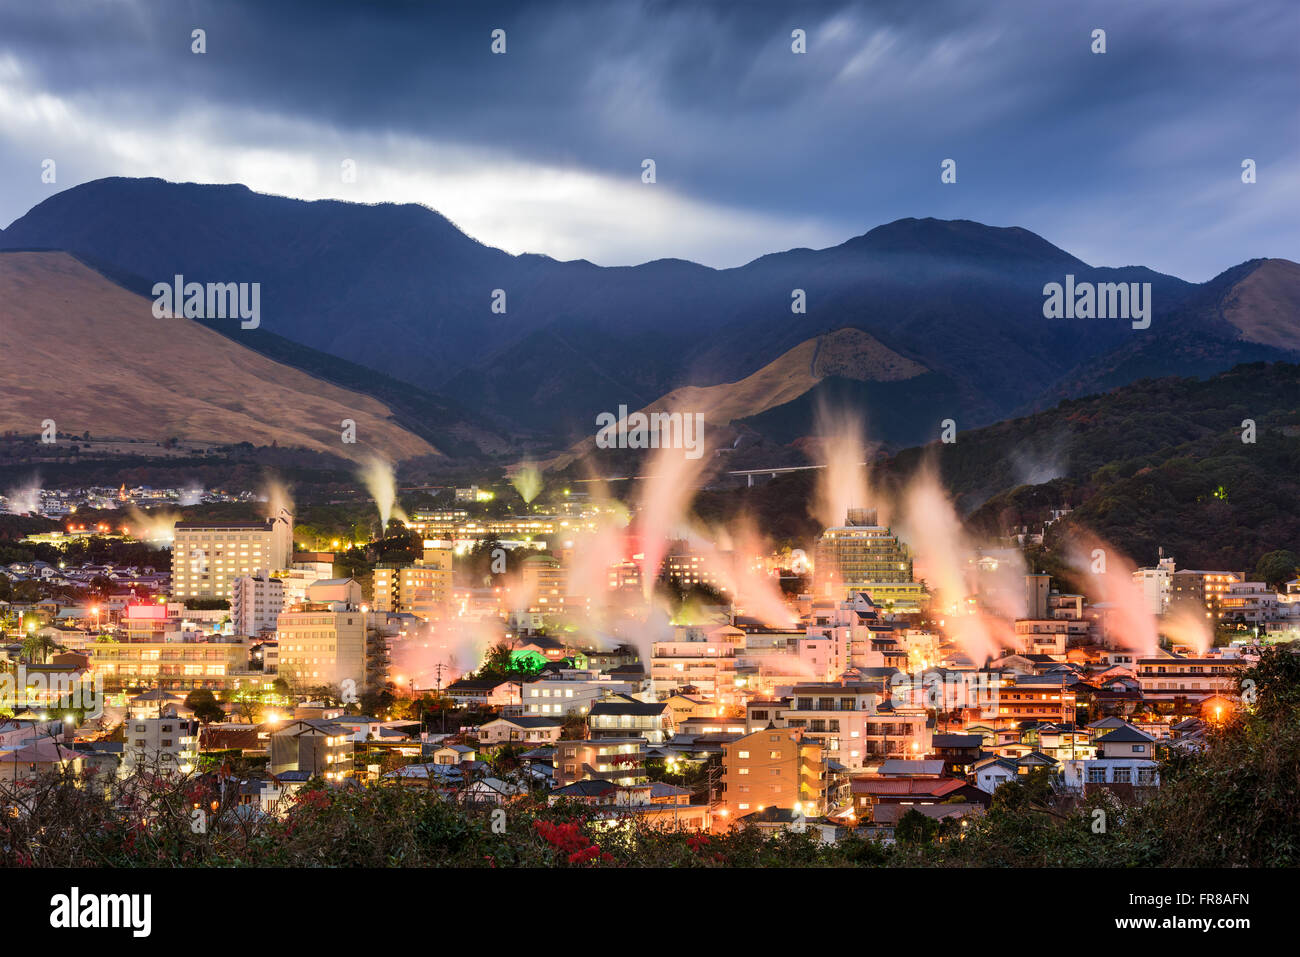 Beppu, Japan cityscape with hot spring bath houses with rising steam. Stock Photo